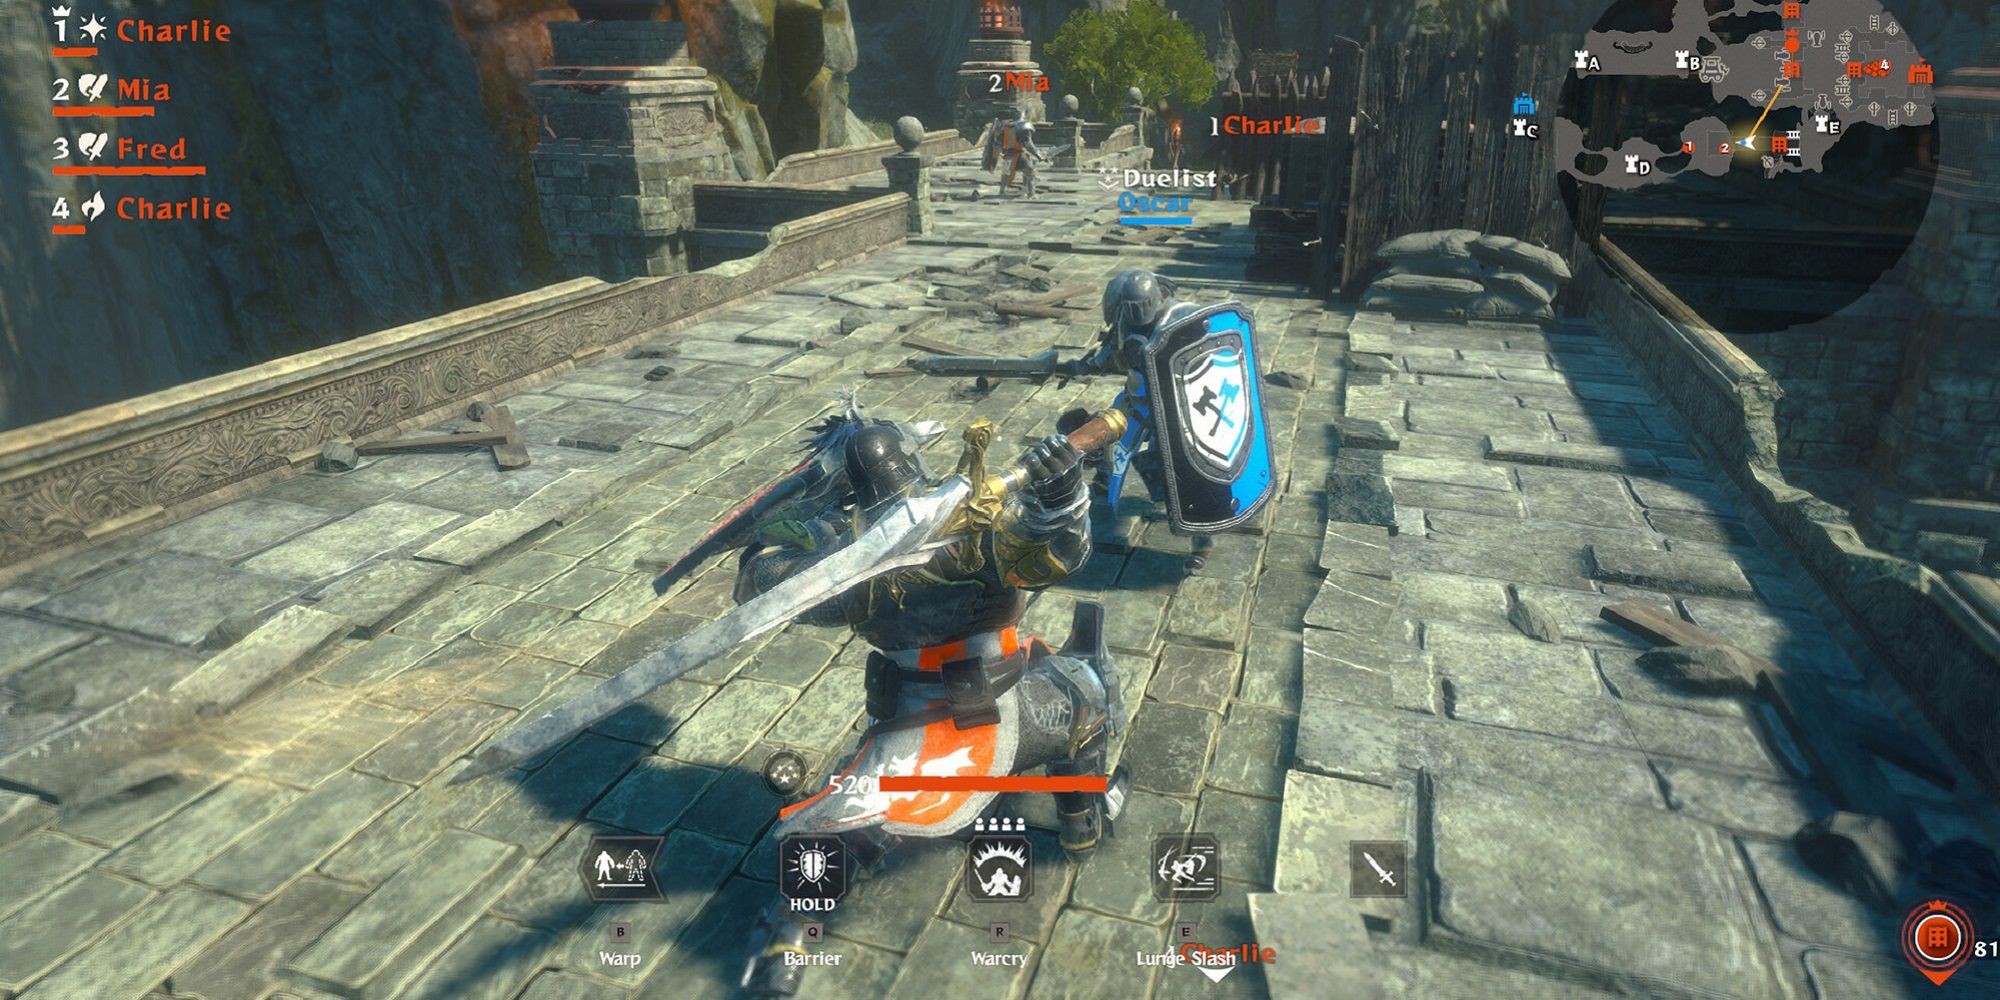 Two knights, one orange and one blue, fight atop castle ramparts in Warlander